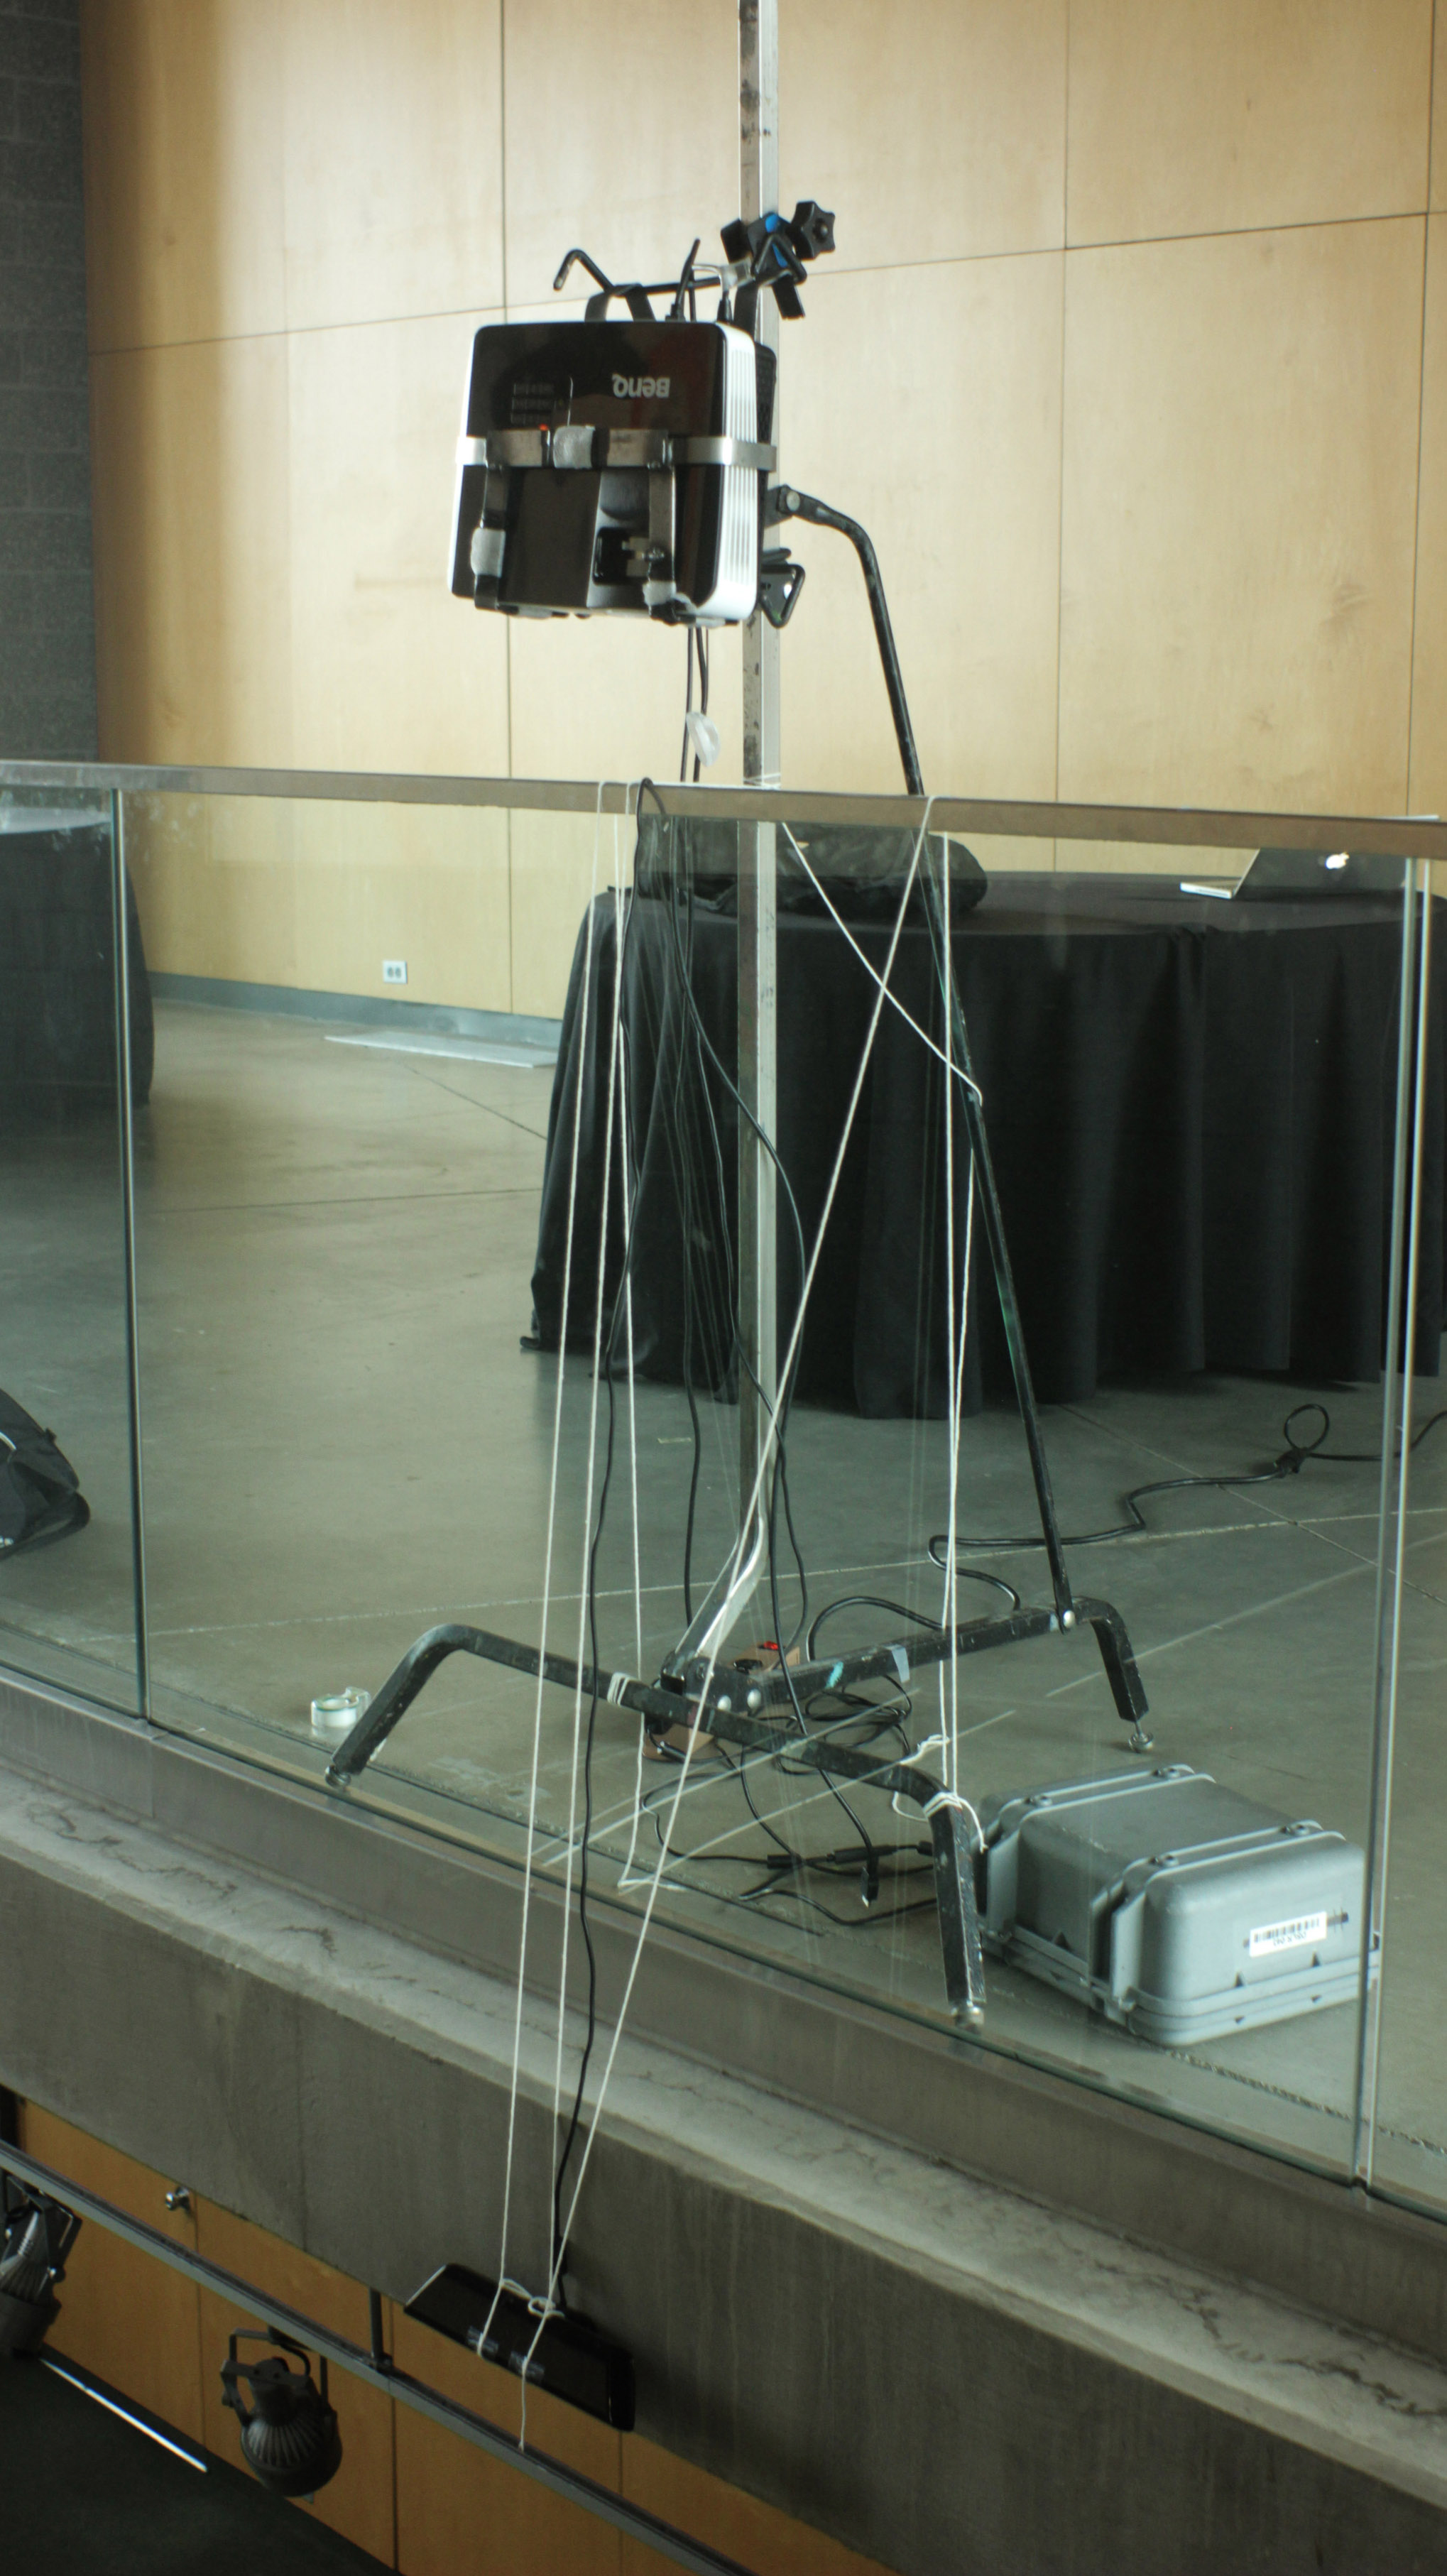 A projector on a stand hangs over a railing, pointing downwards. Strings are attached to the rail, from which a kinect sensor hangs below the projector